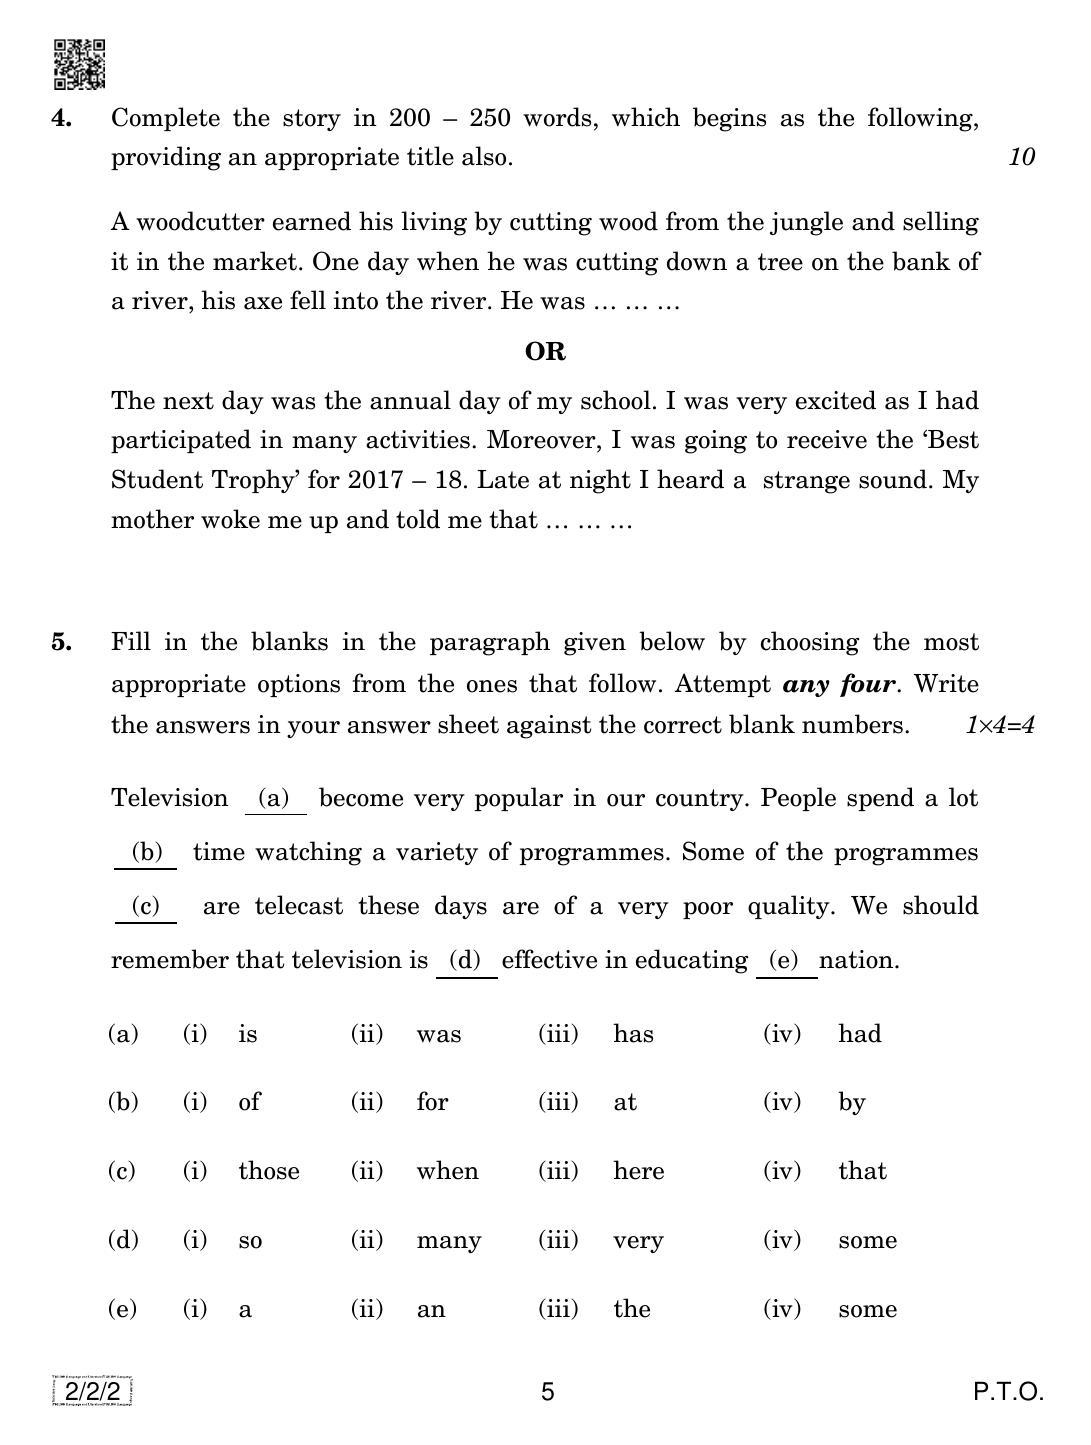 CBSE Class 10 2-2-2  ENGLISH LANGUAGE AND LETERATURE 2019 Question Paper - Page 5